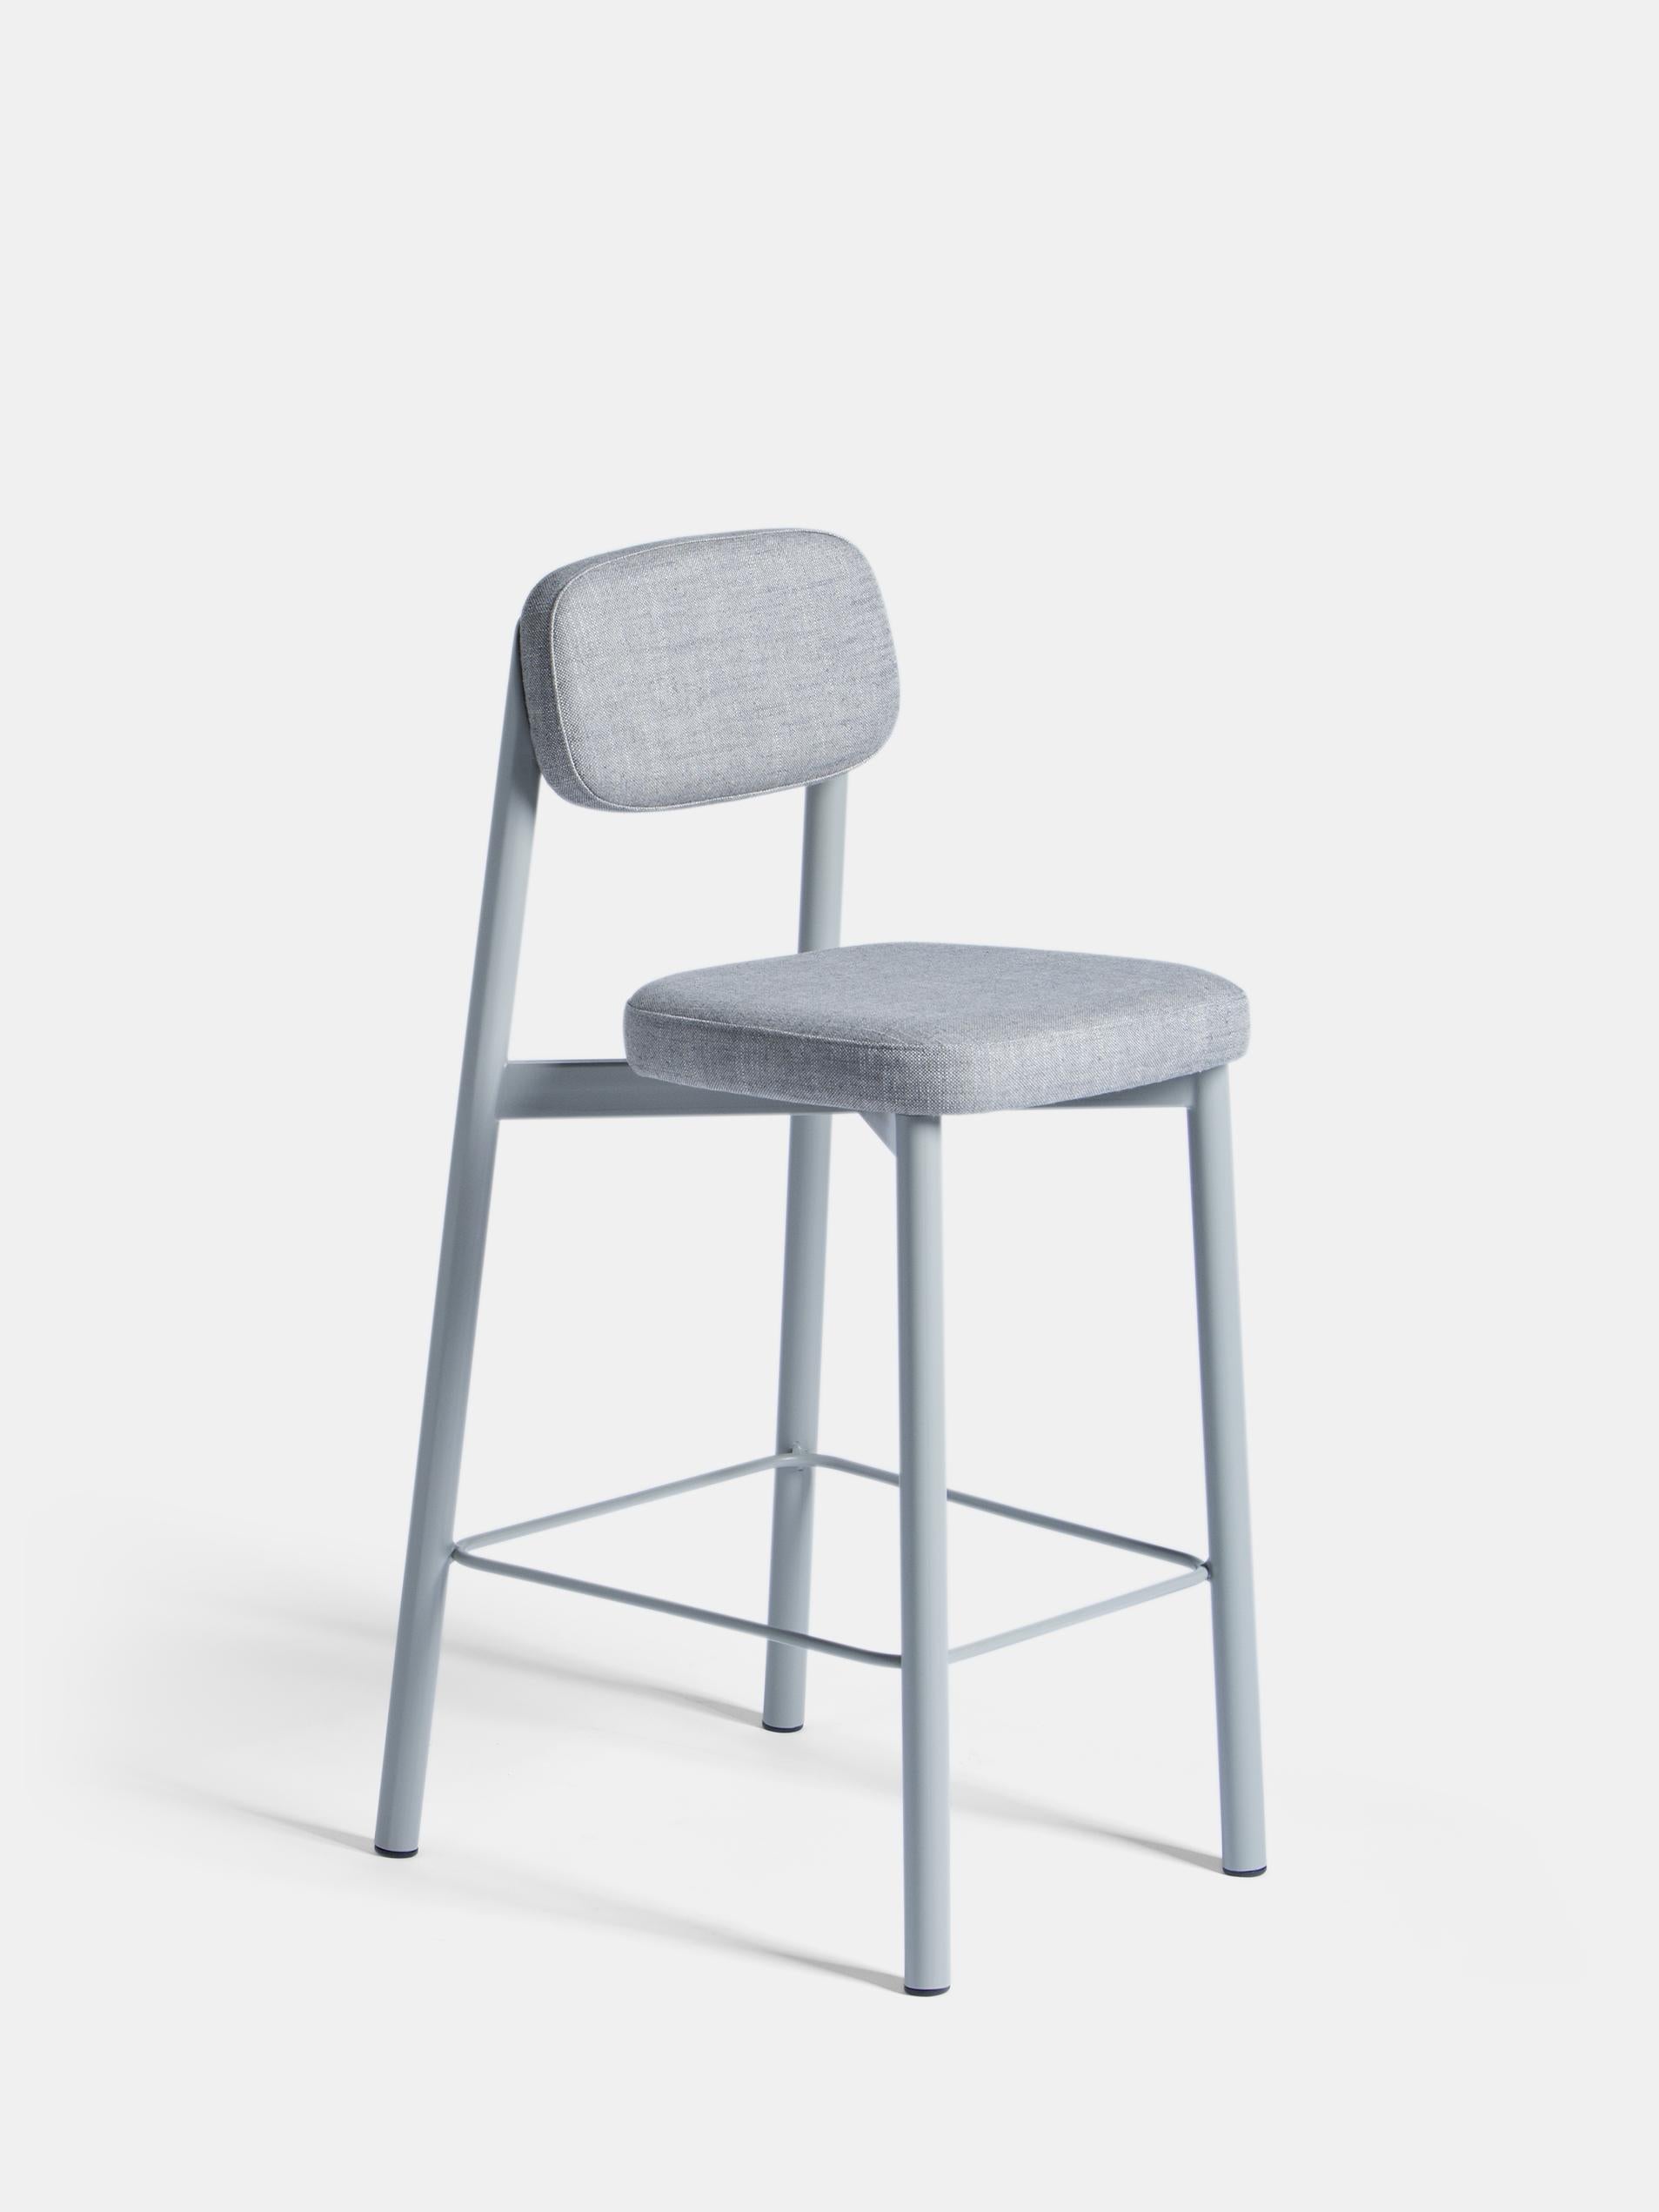 Set of 6 Grey Residence 65 Counter Chairs by Kann Design
Dimensions: D 50 x W 46 x H 93 cm.
Materials: Steel tube, HR foam, fabric upholstery Sahco Ellis 4 (11% viscose, 30 % linen).
Available in other colors.

All of the Residence seats were